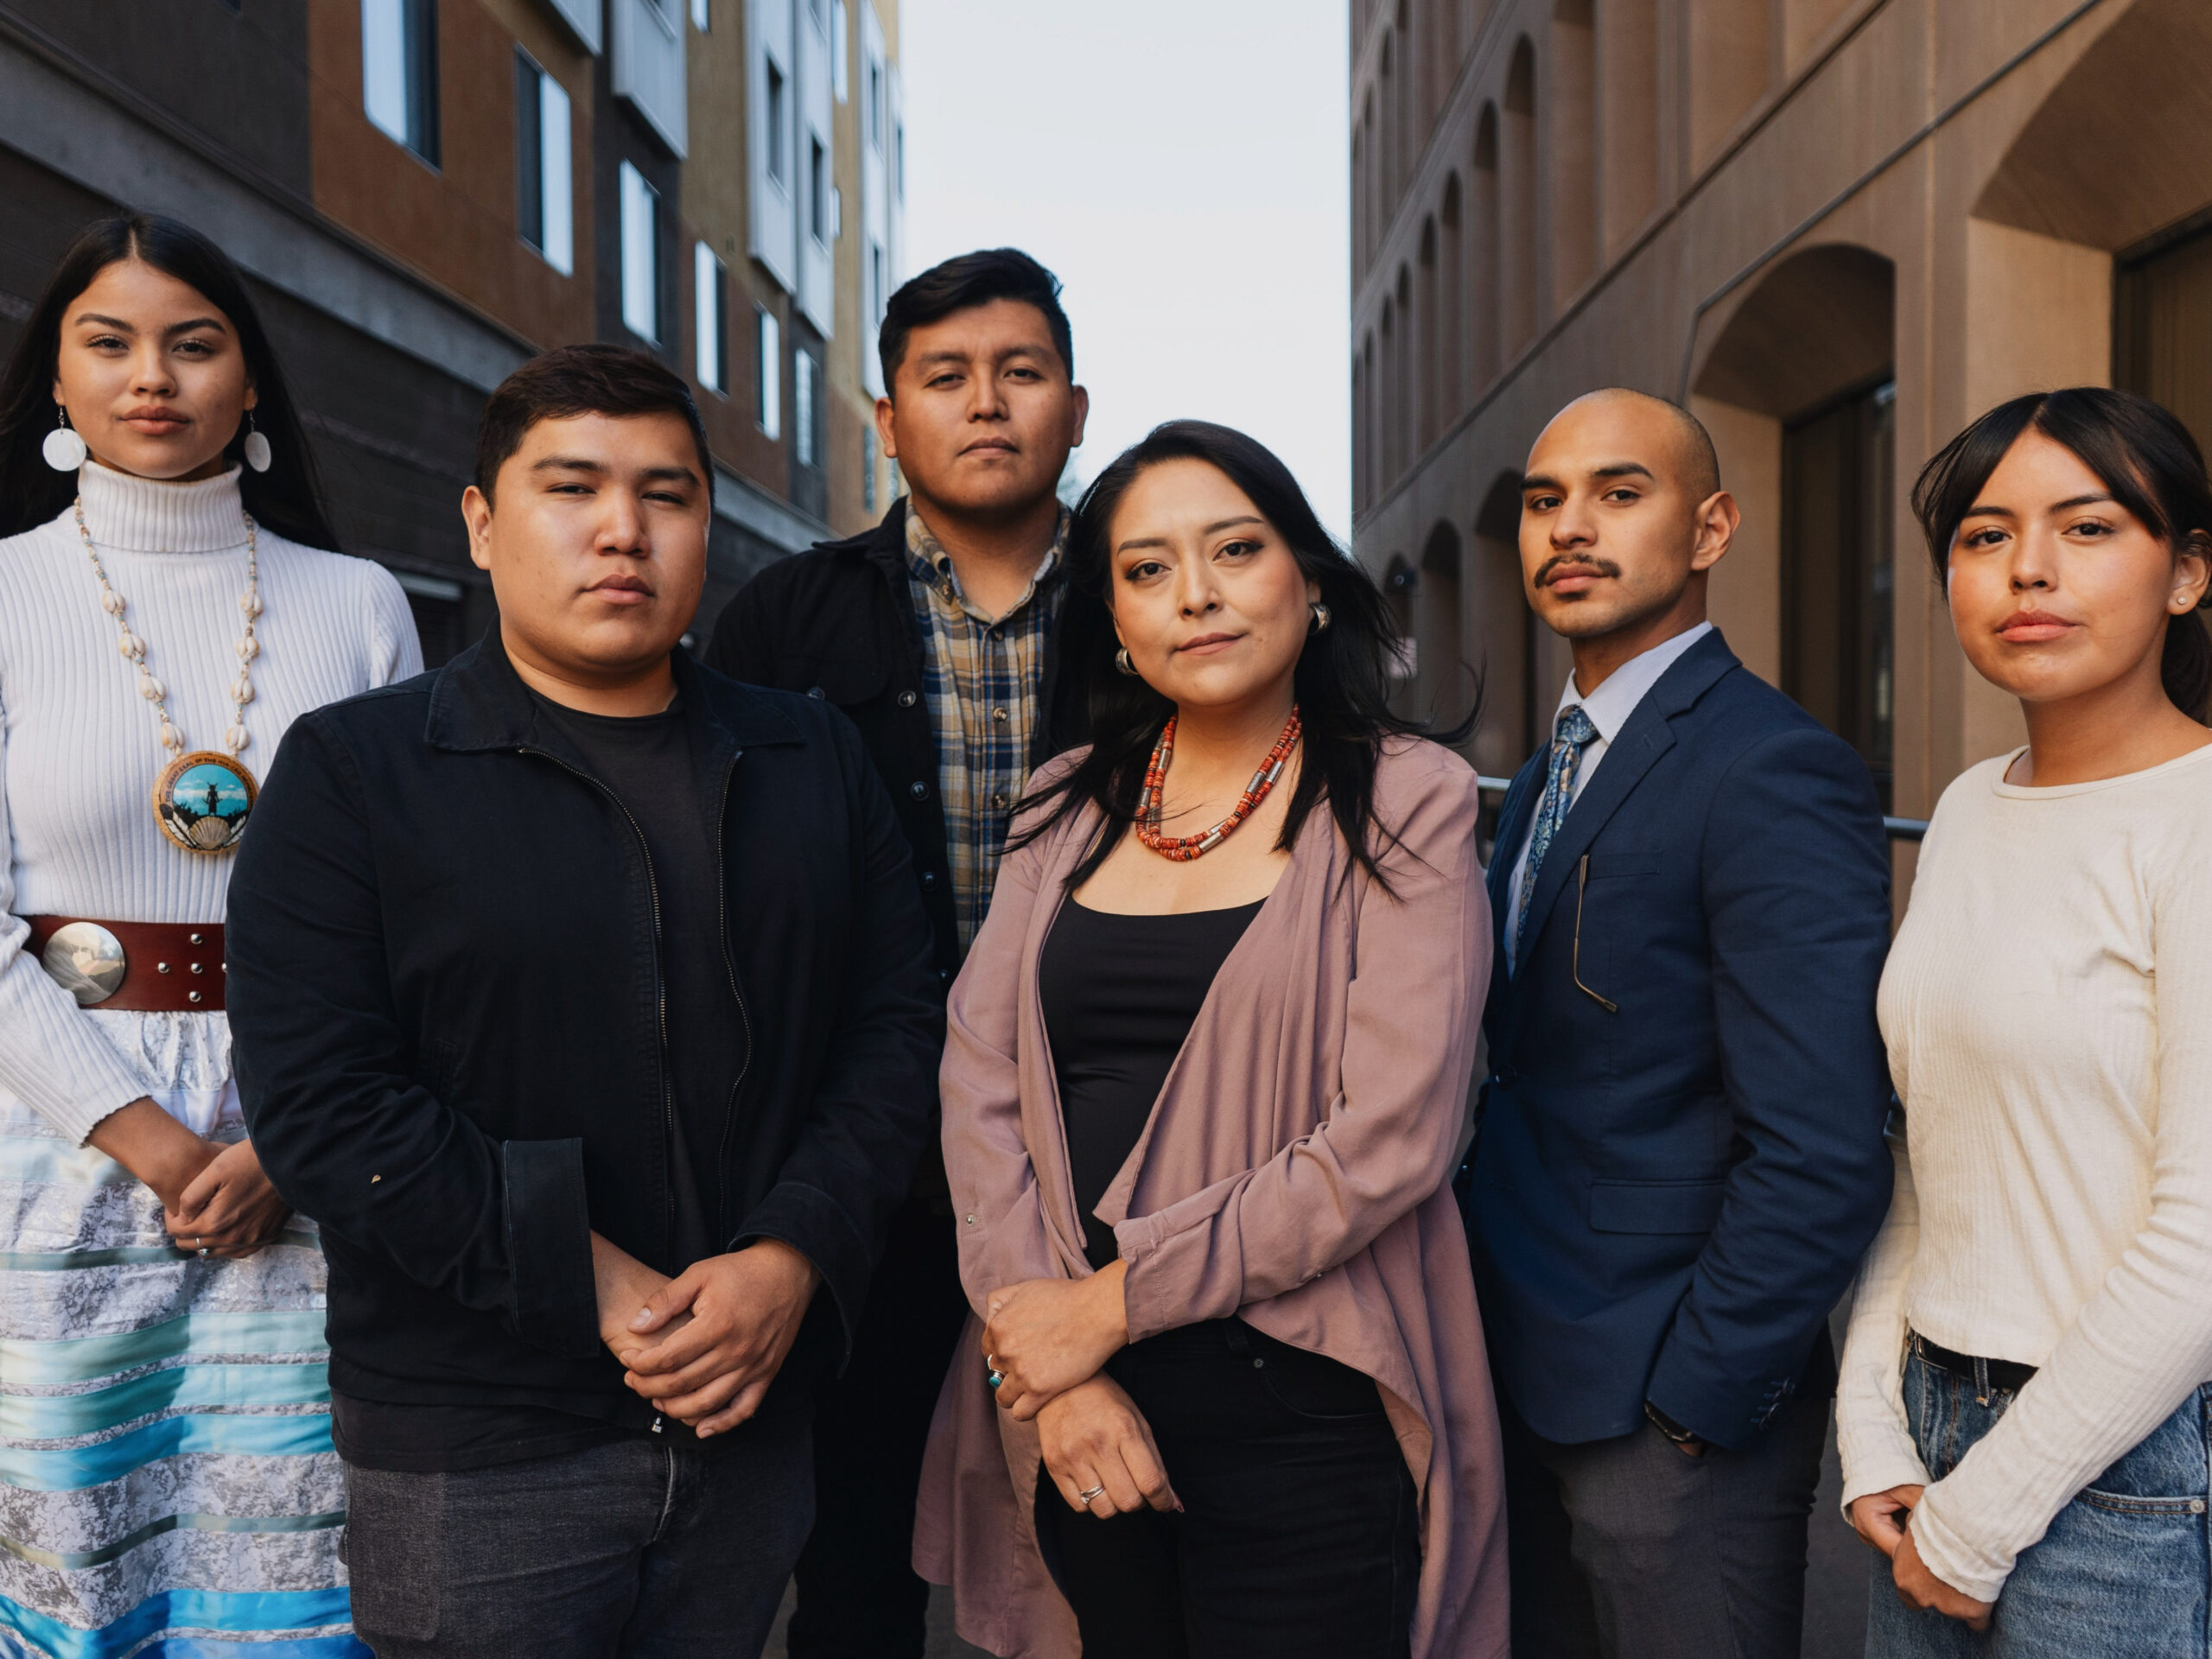 In Arizona, these young Native American voters seize their political power